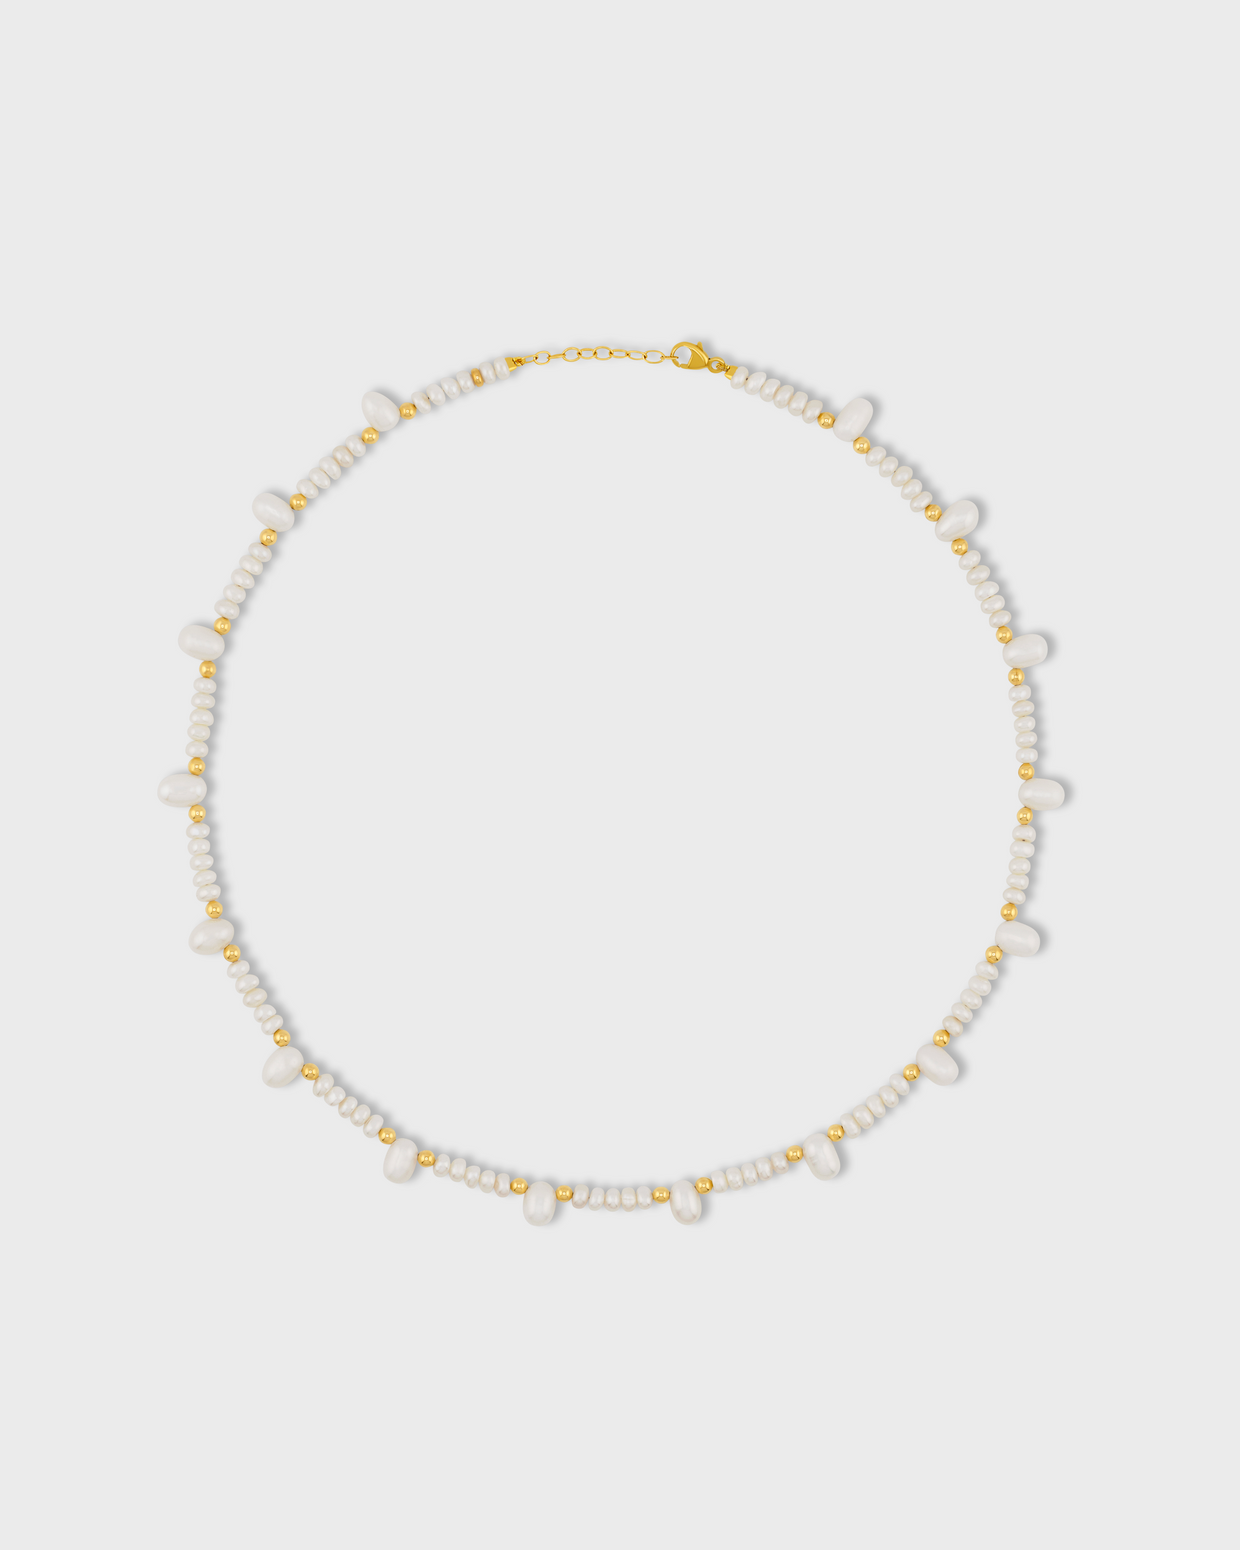 Ocean Pearl Gold Bead Necklace